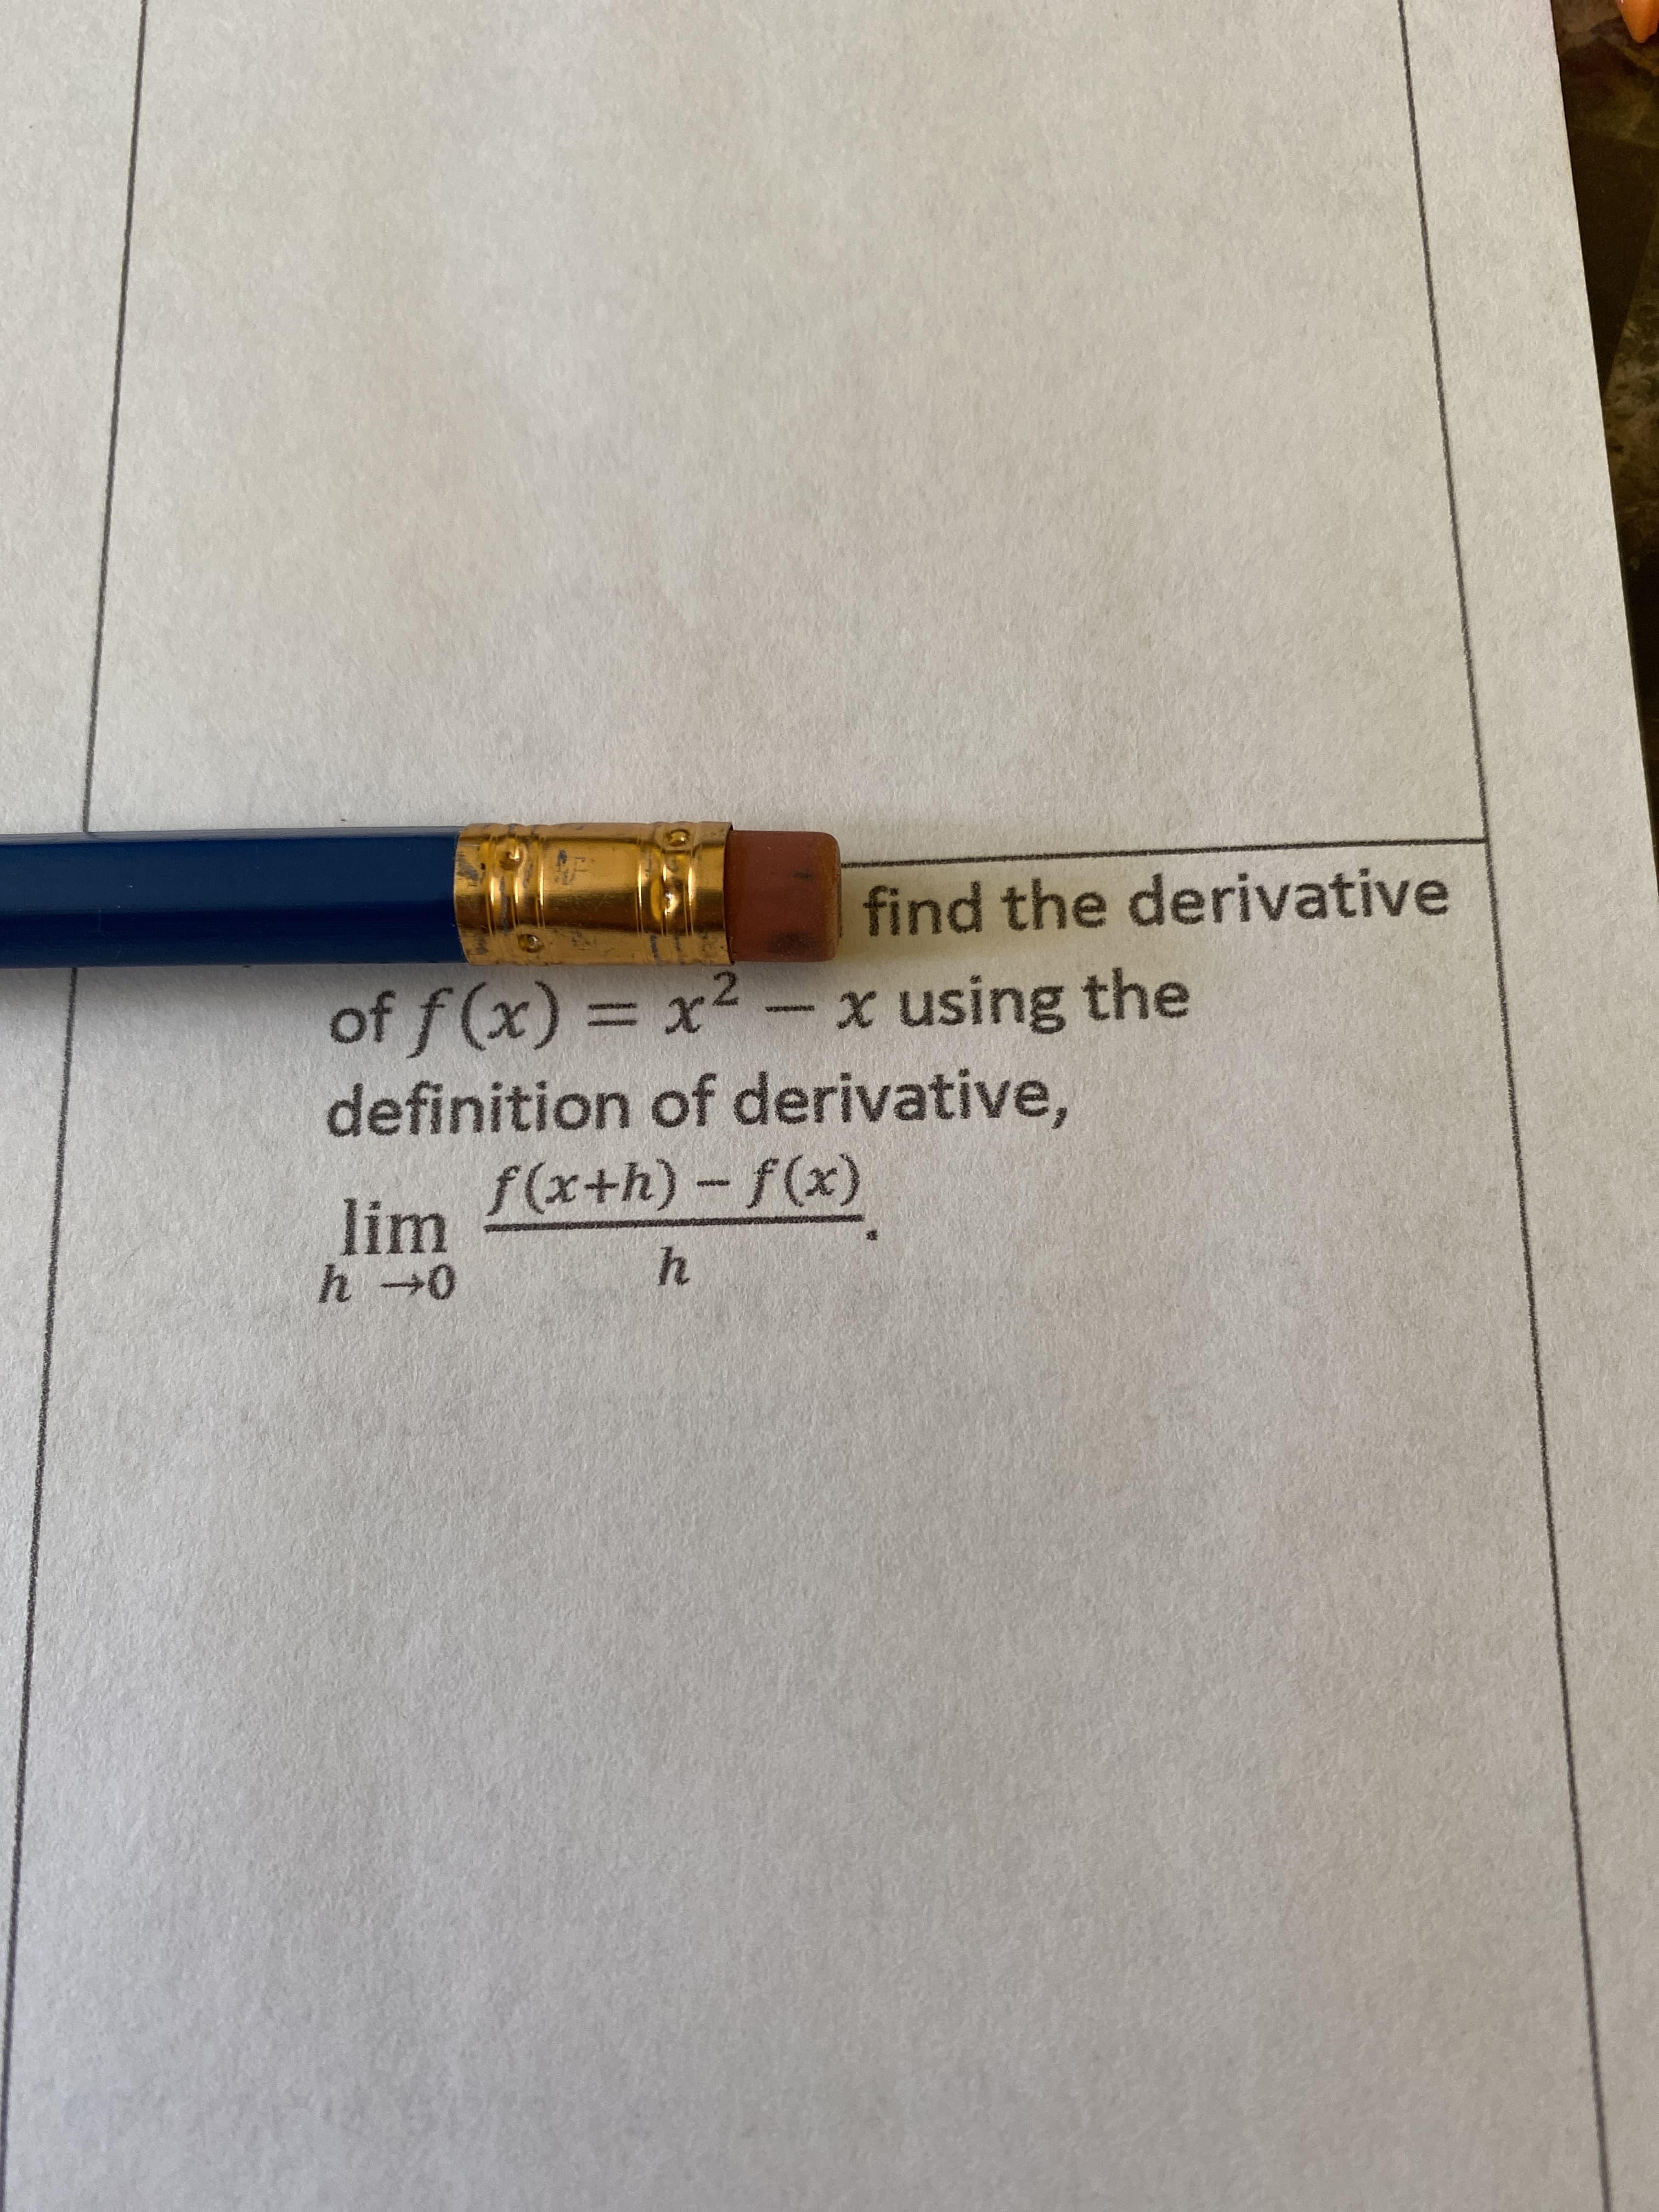 find the derivative
x using the
of f (x) = x2 -
definition of derivative,
%3D
f(x+h)-f(x)
lim
h0
h
